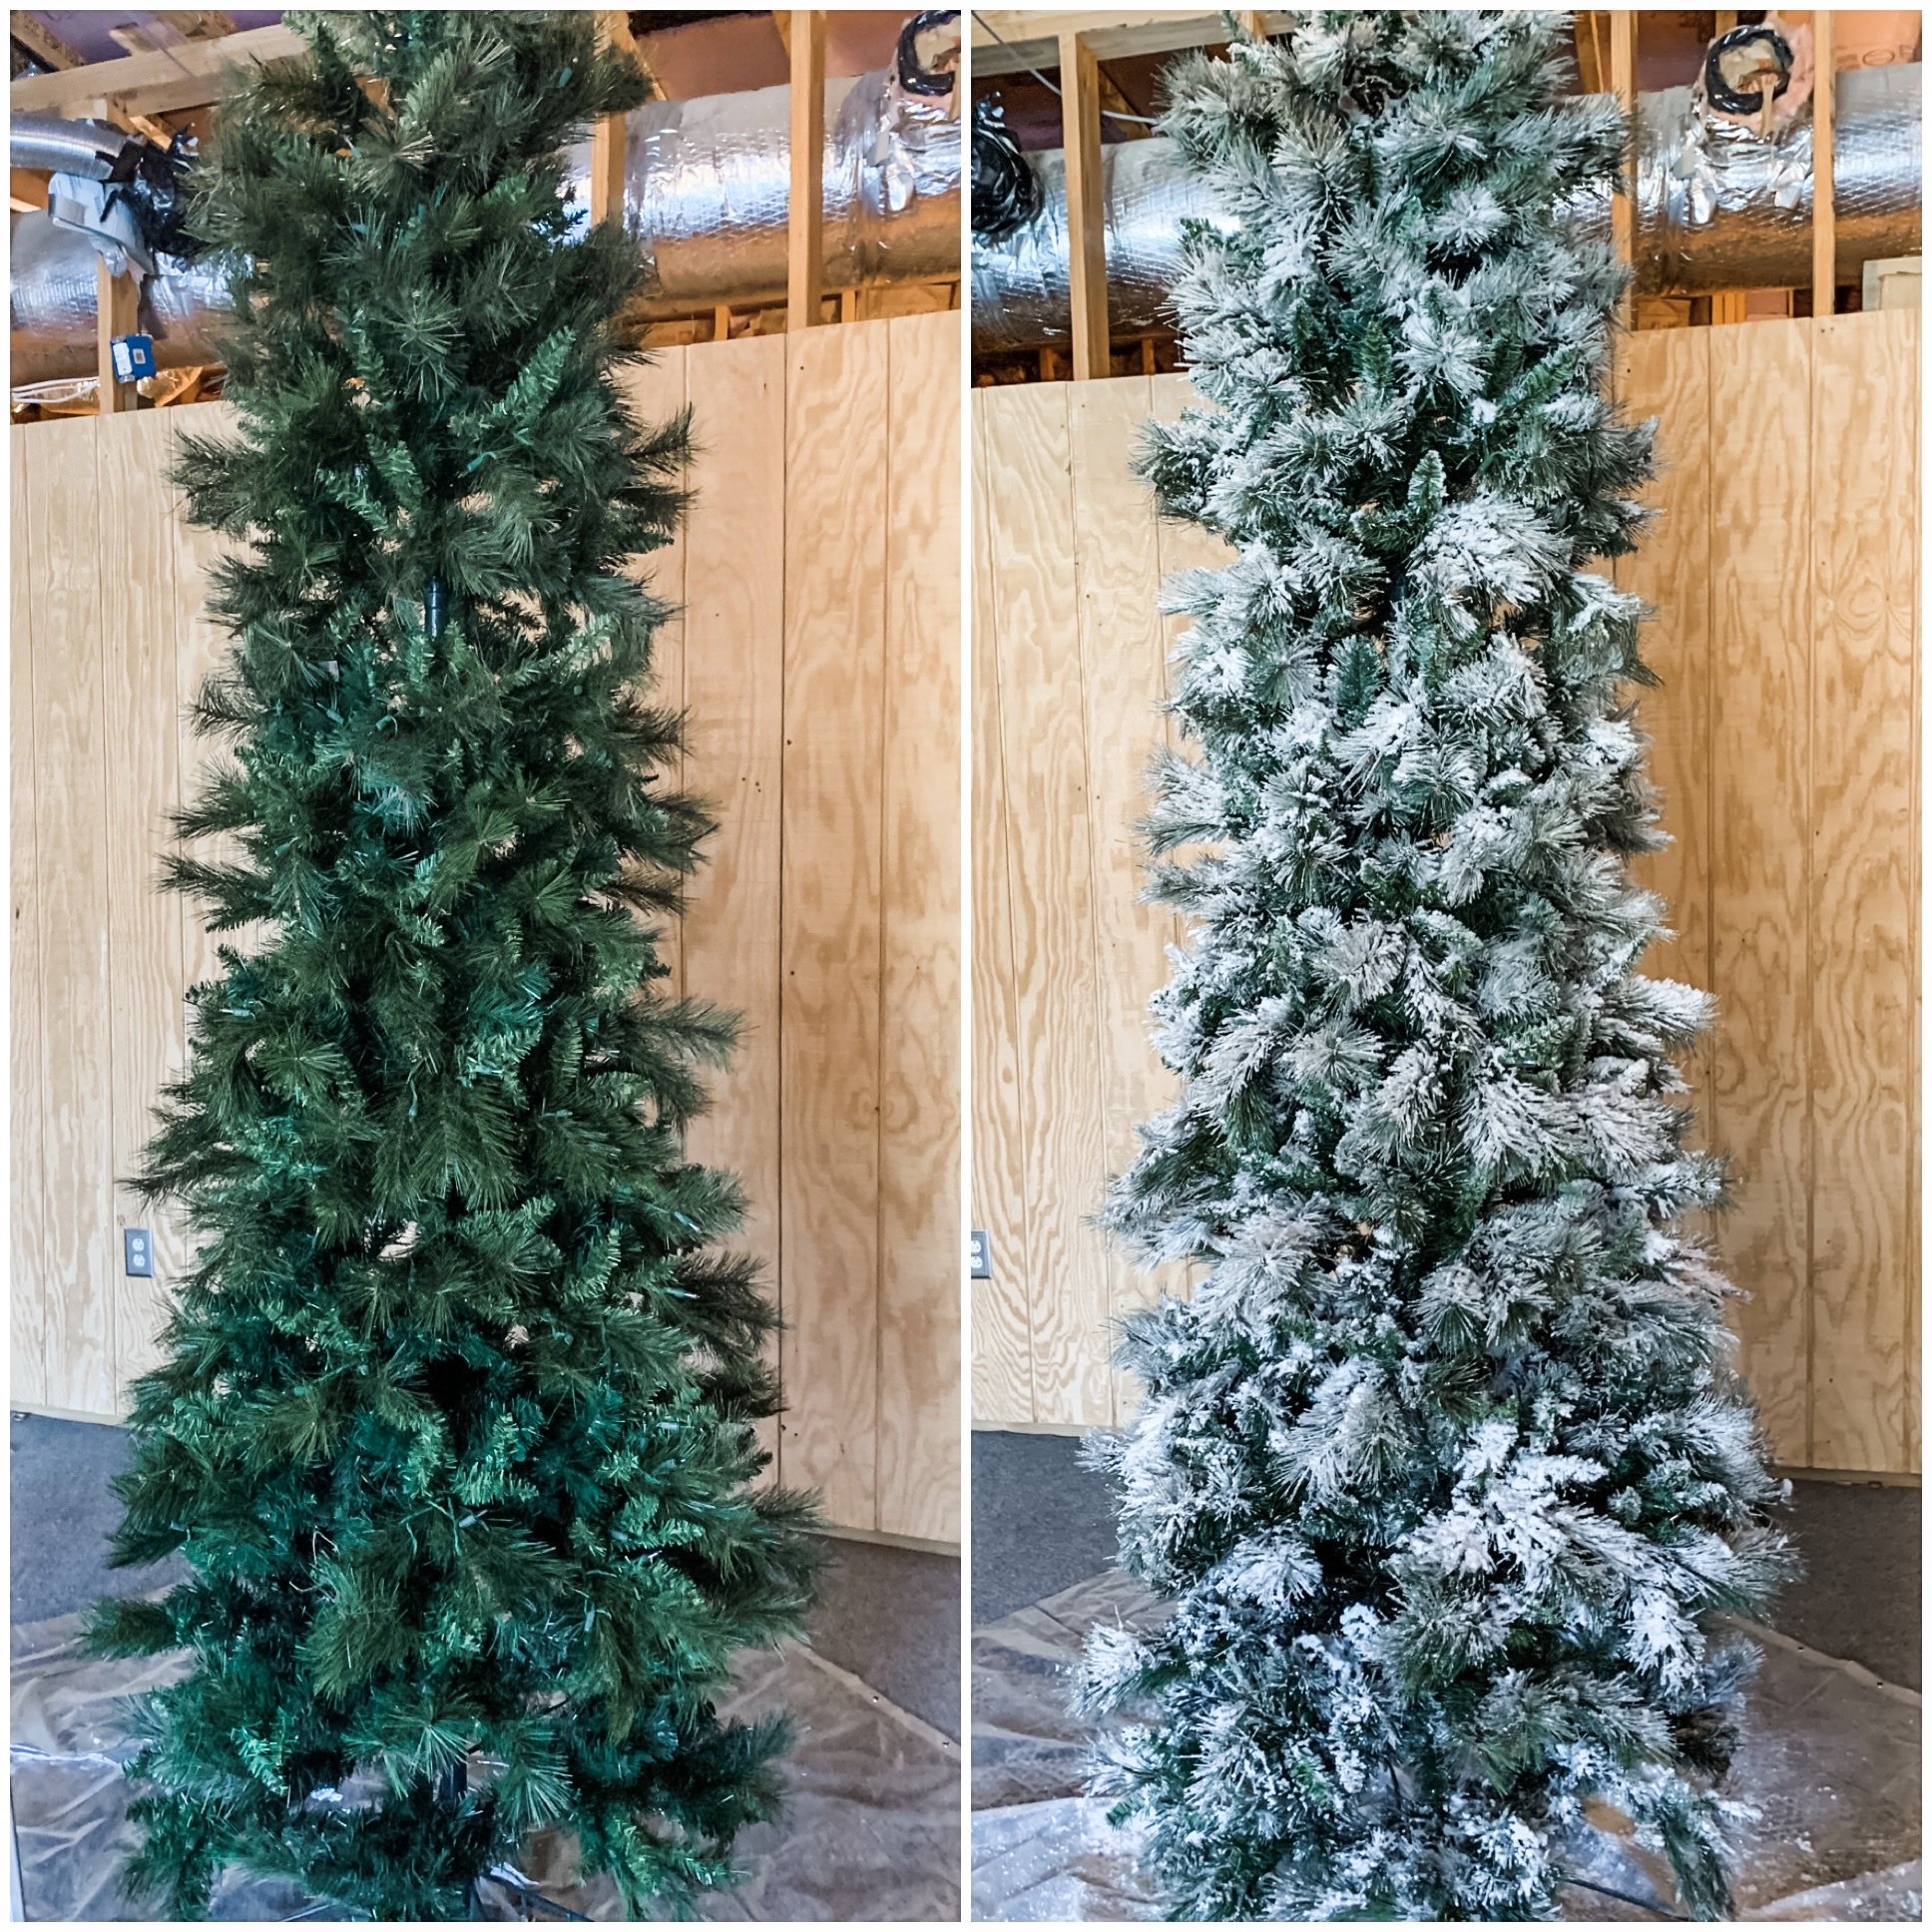 DIY flocked Christmas tree instructions, a step by step guide!